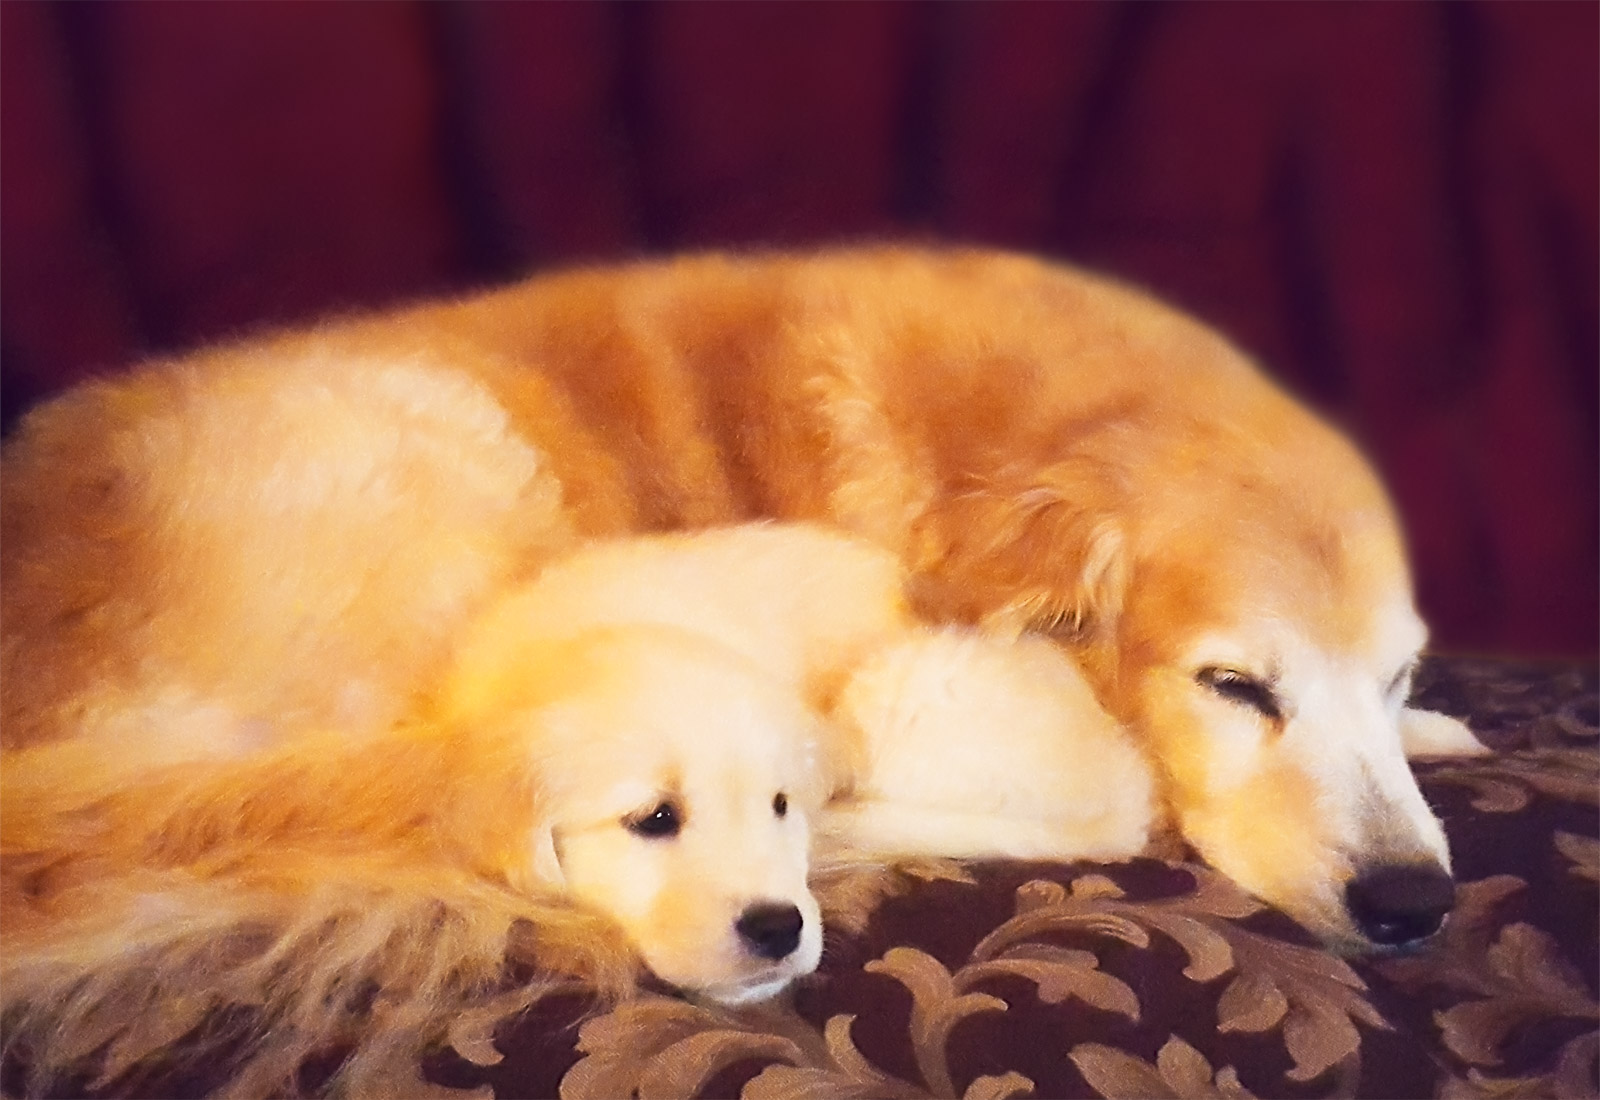 Golden Retriever puppy snuggling with her big sister